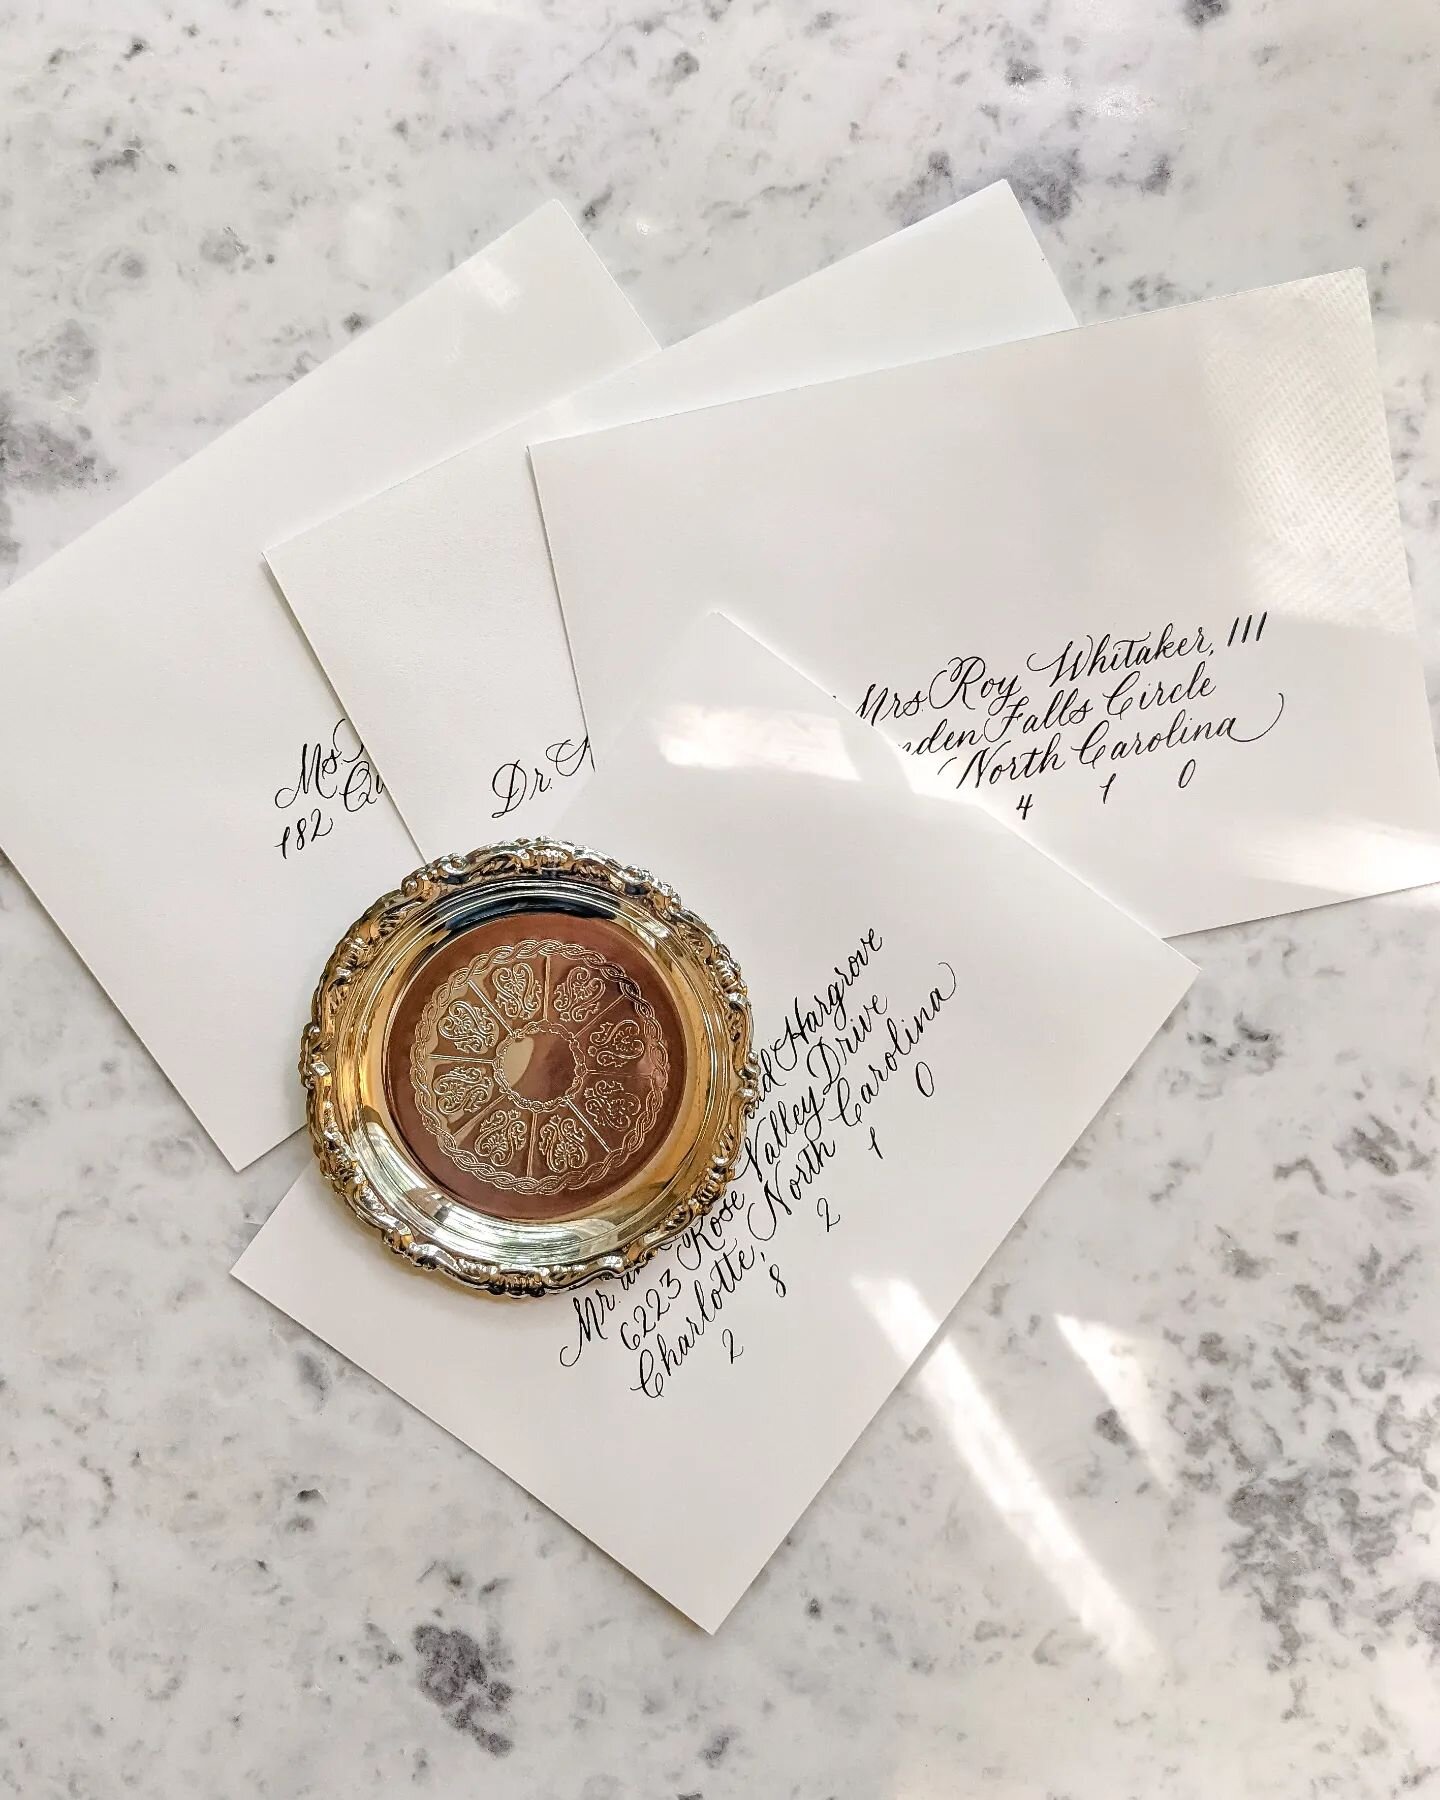 Did I buy a marble topped table from @worldmarket with the primary purpose of being a photo backdrop? Maybe. Is that extra? Of course it is... but so am I 💁🏻&zwj;♀️
.
.
.
.
#unapologeticallyextra #envelopes #envelopecalligraphy #moderncalligraphy #